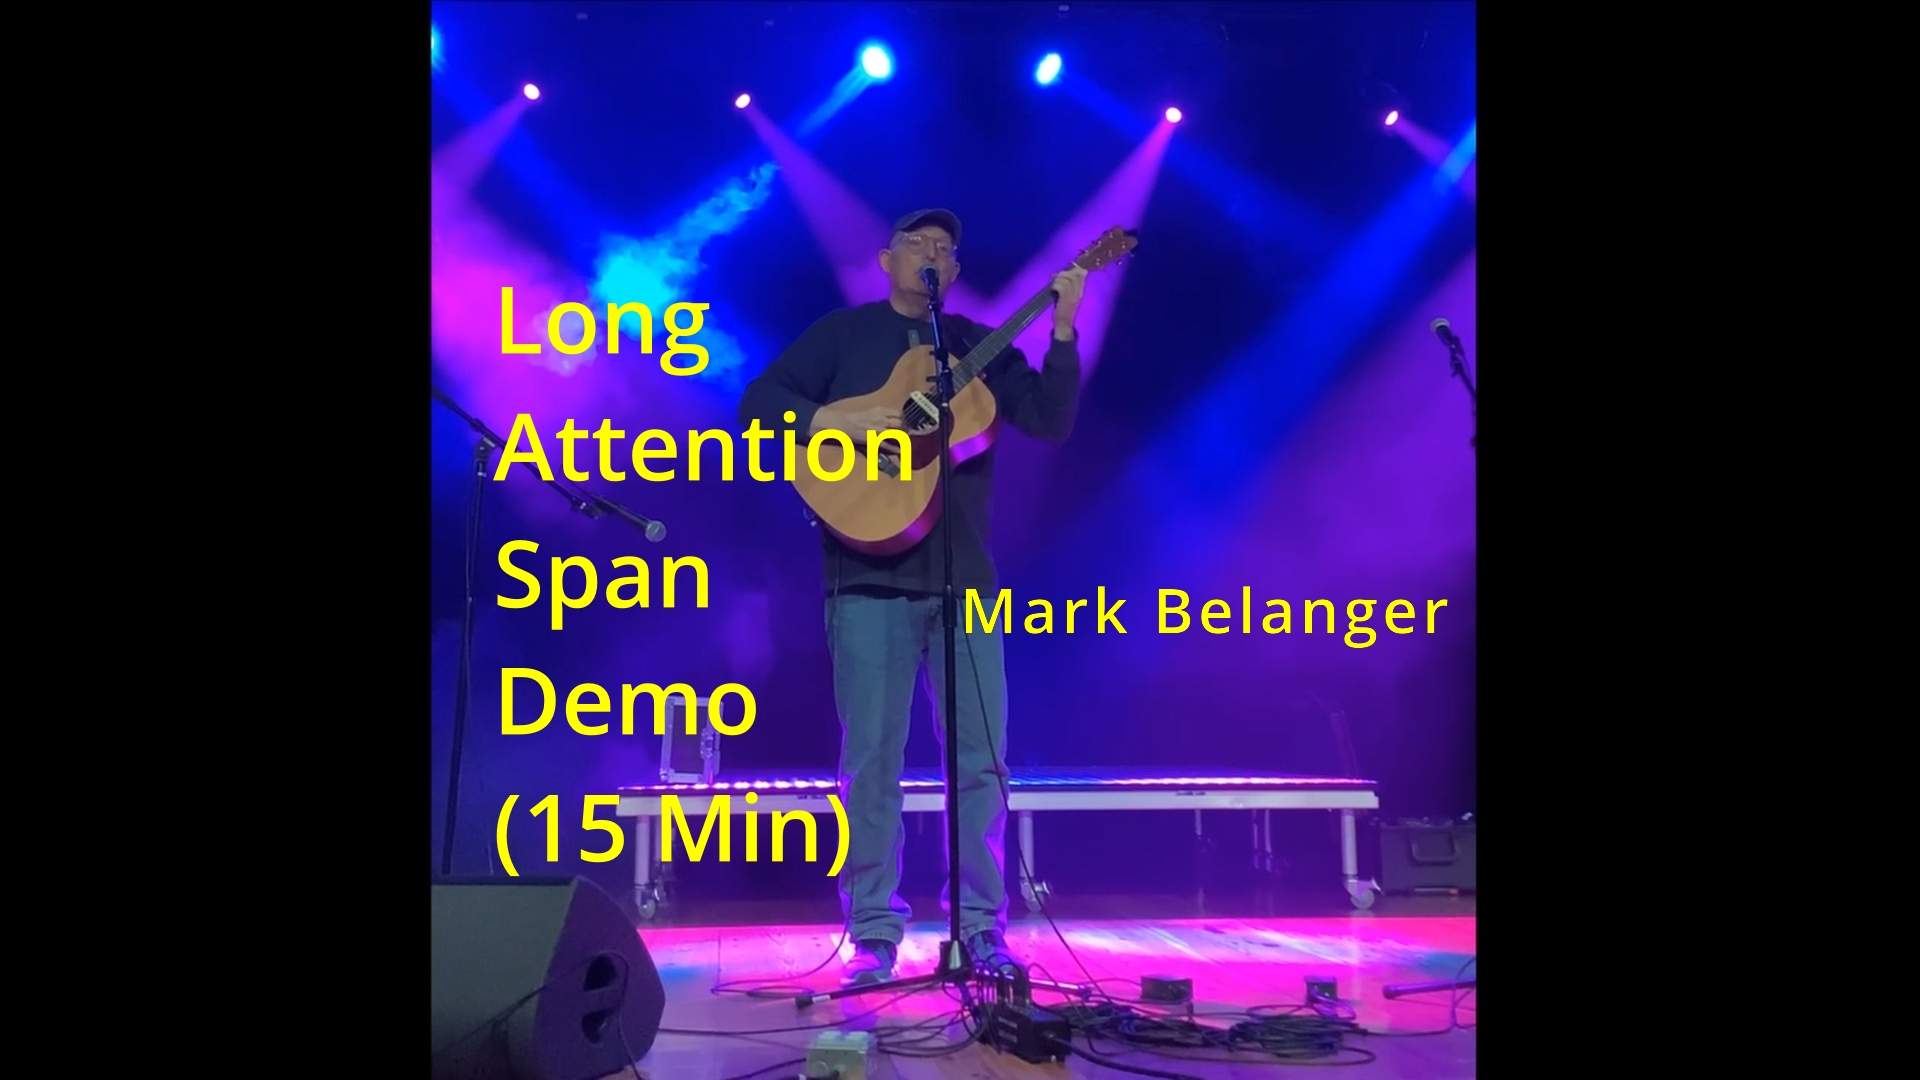 Long Attention Span Demo